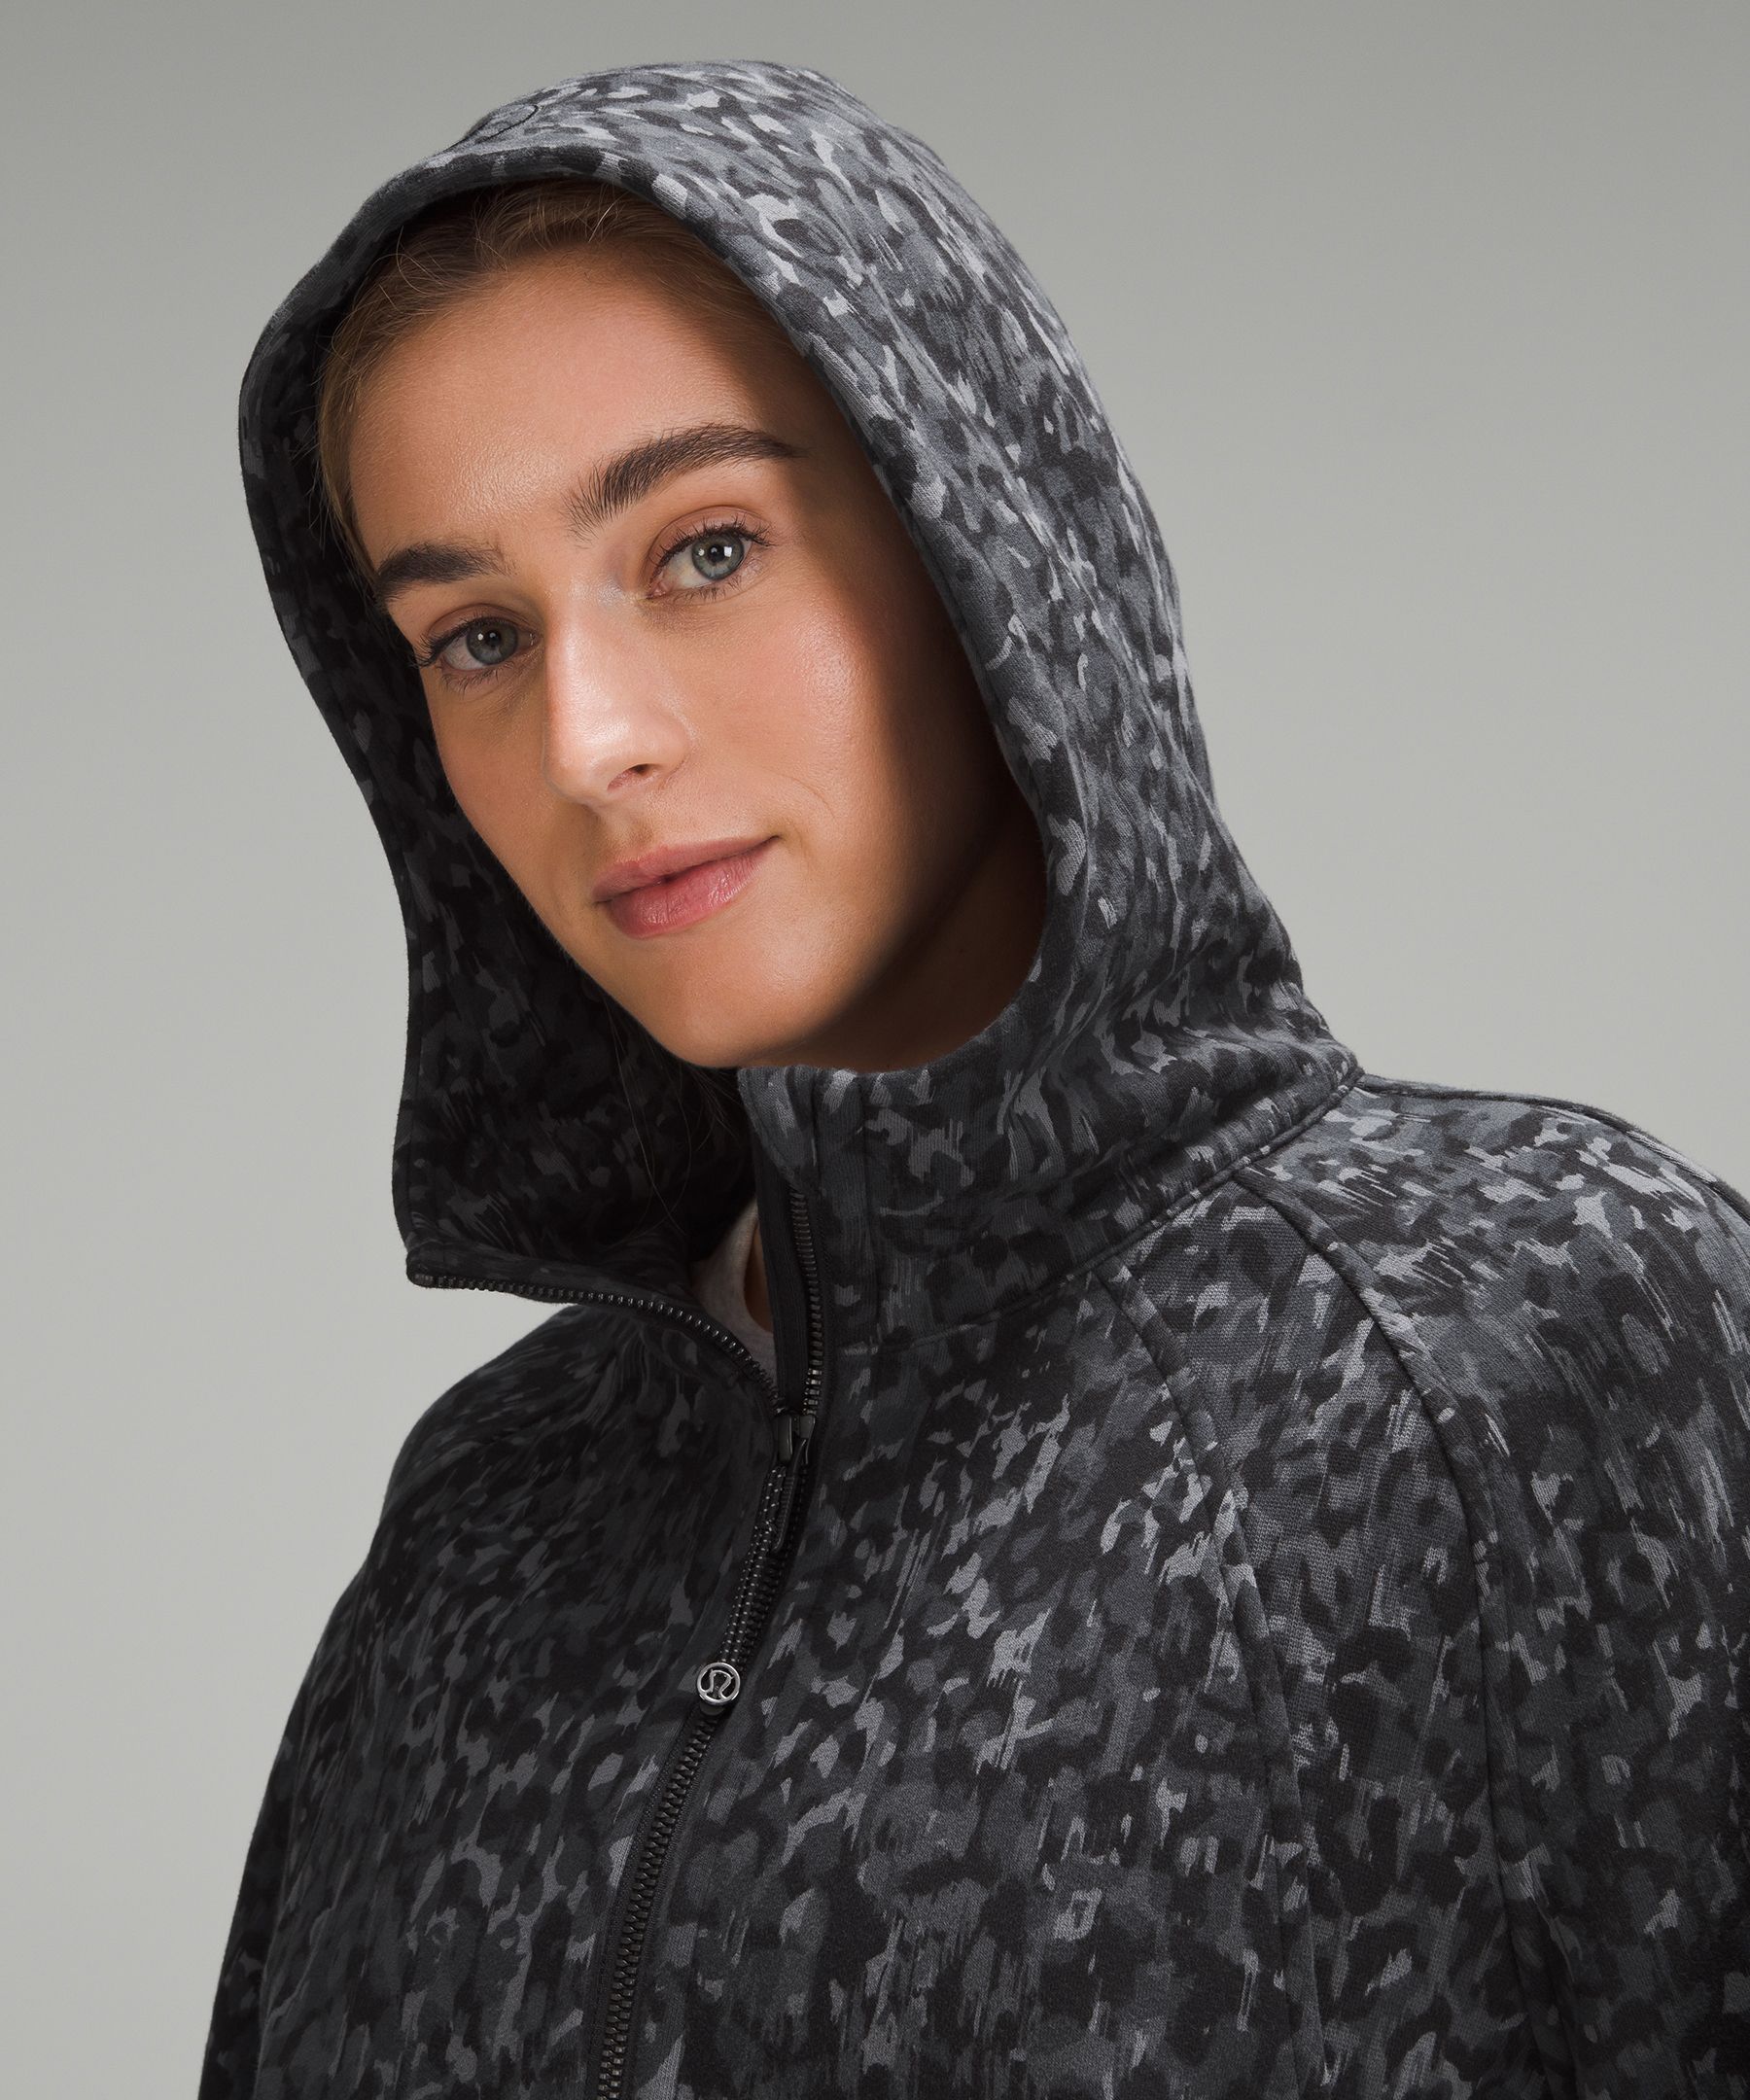 Lululemon scuba oversized half zipper hood sweater NWT. Color in heathered  speckled black in original package. Size M/L item coming with one free  shopping bag Size M - $180 New With Tags 